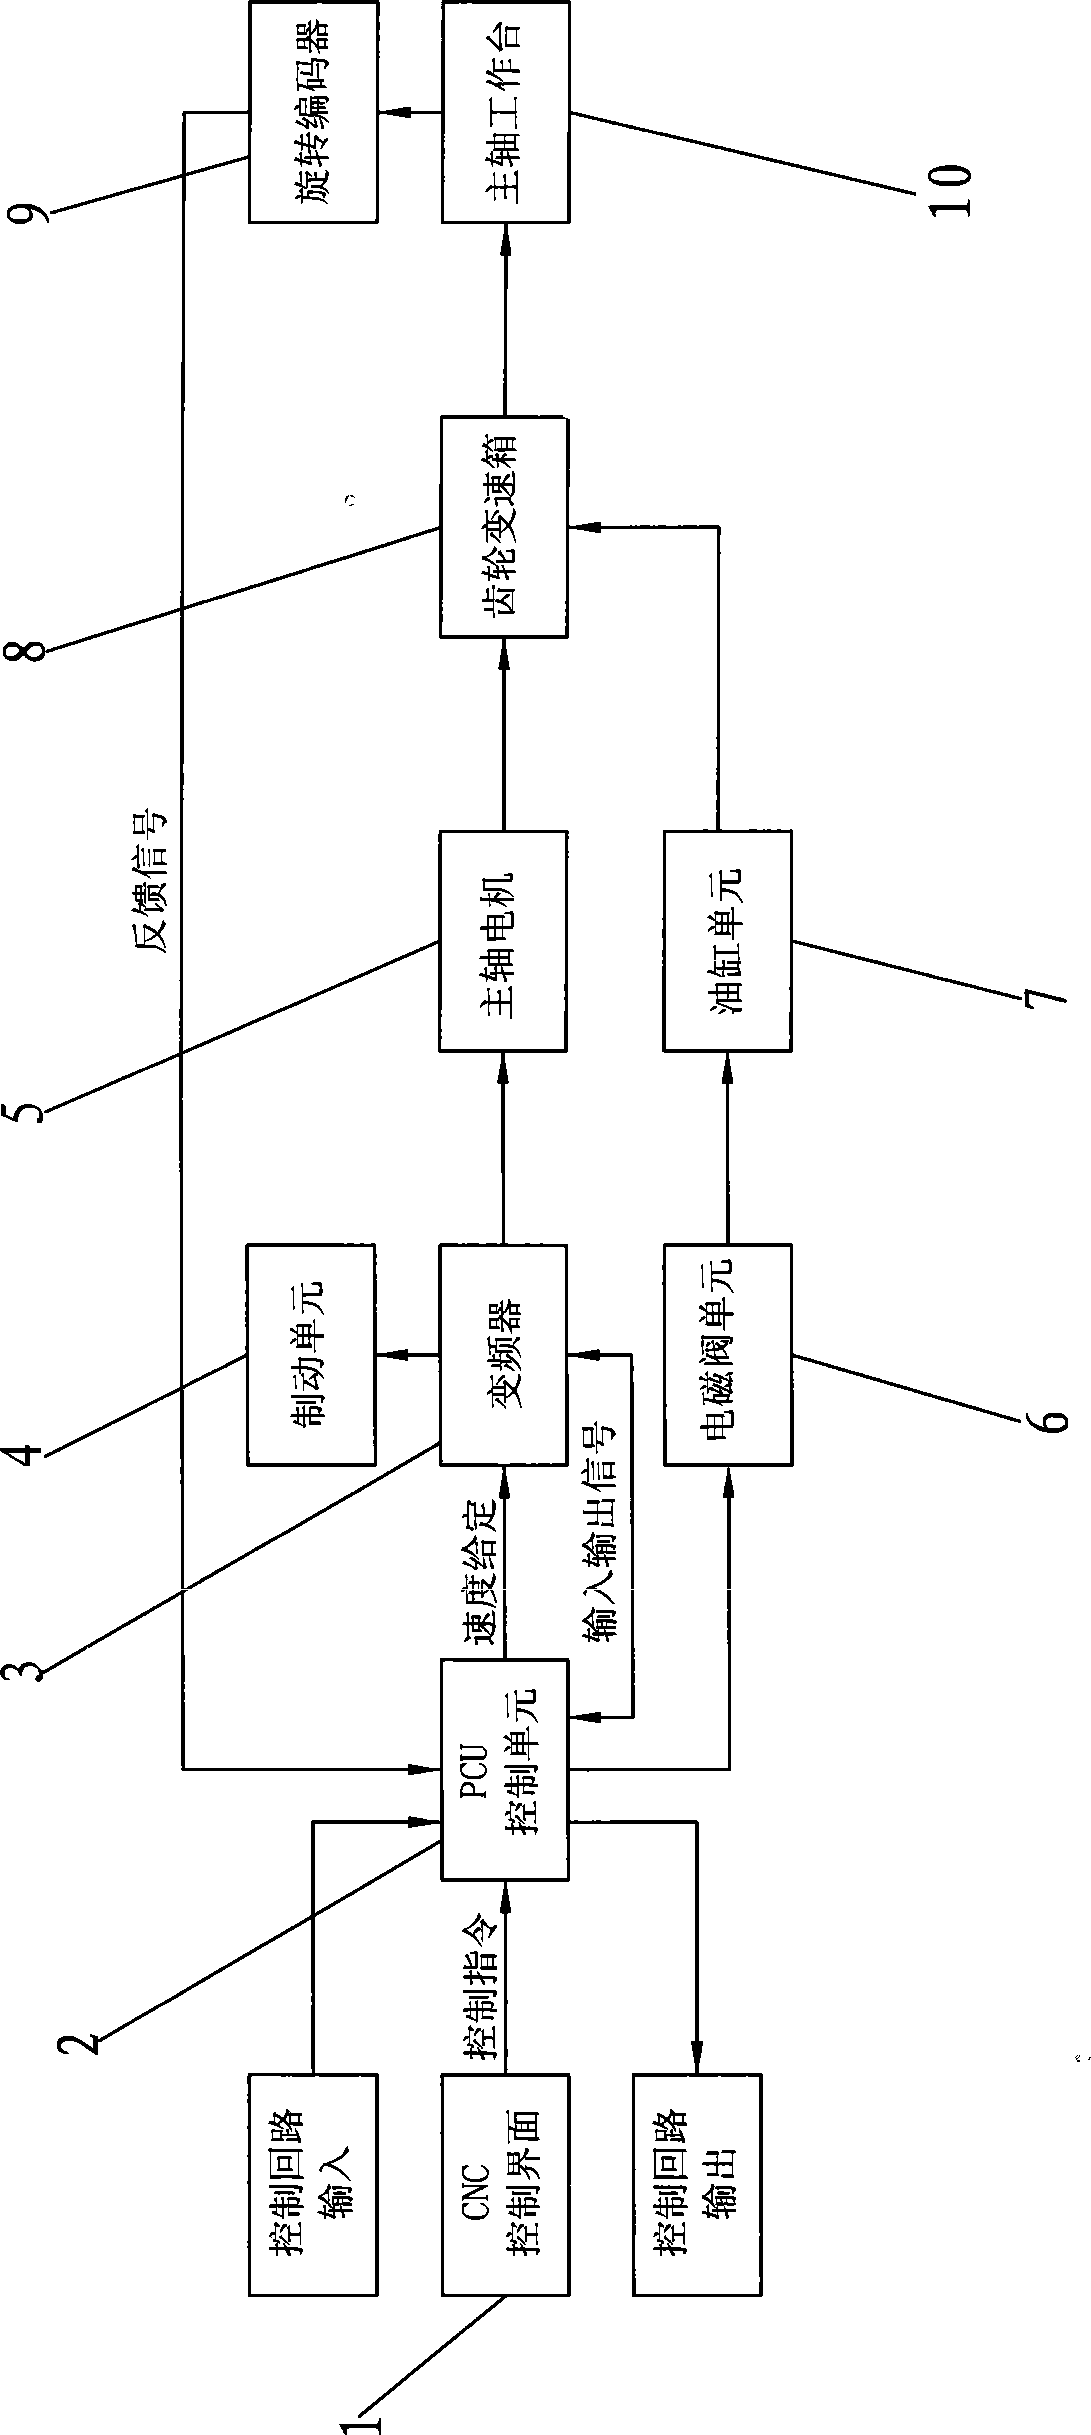 Main spindle transmission control system of economy type numerically controlled lathe